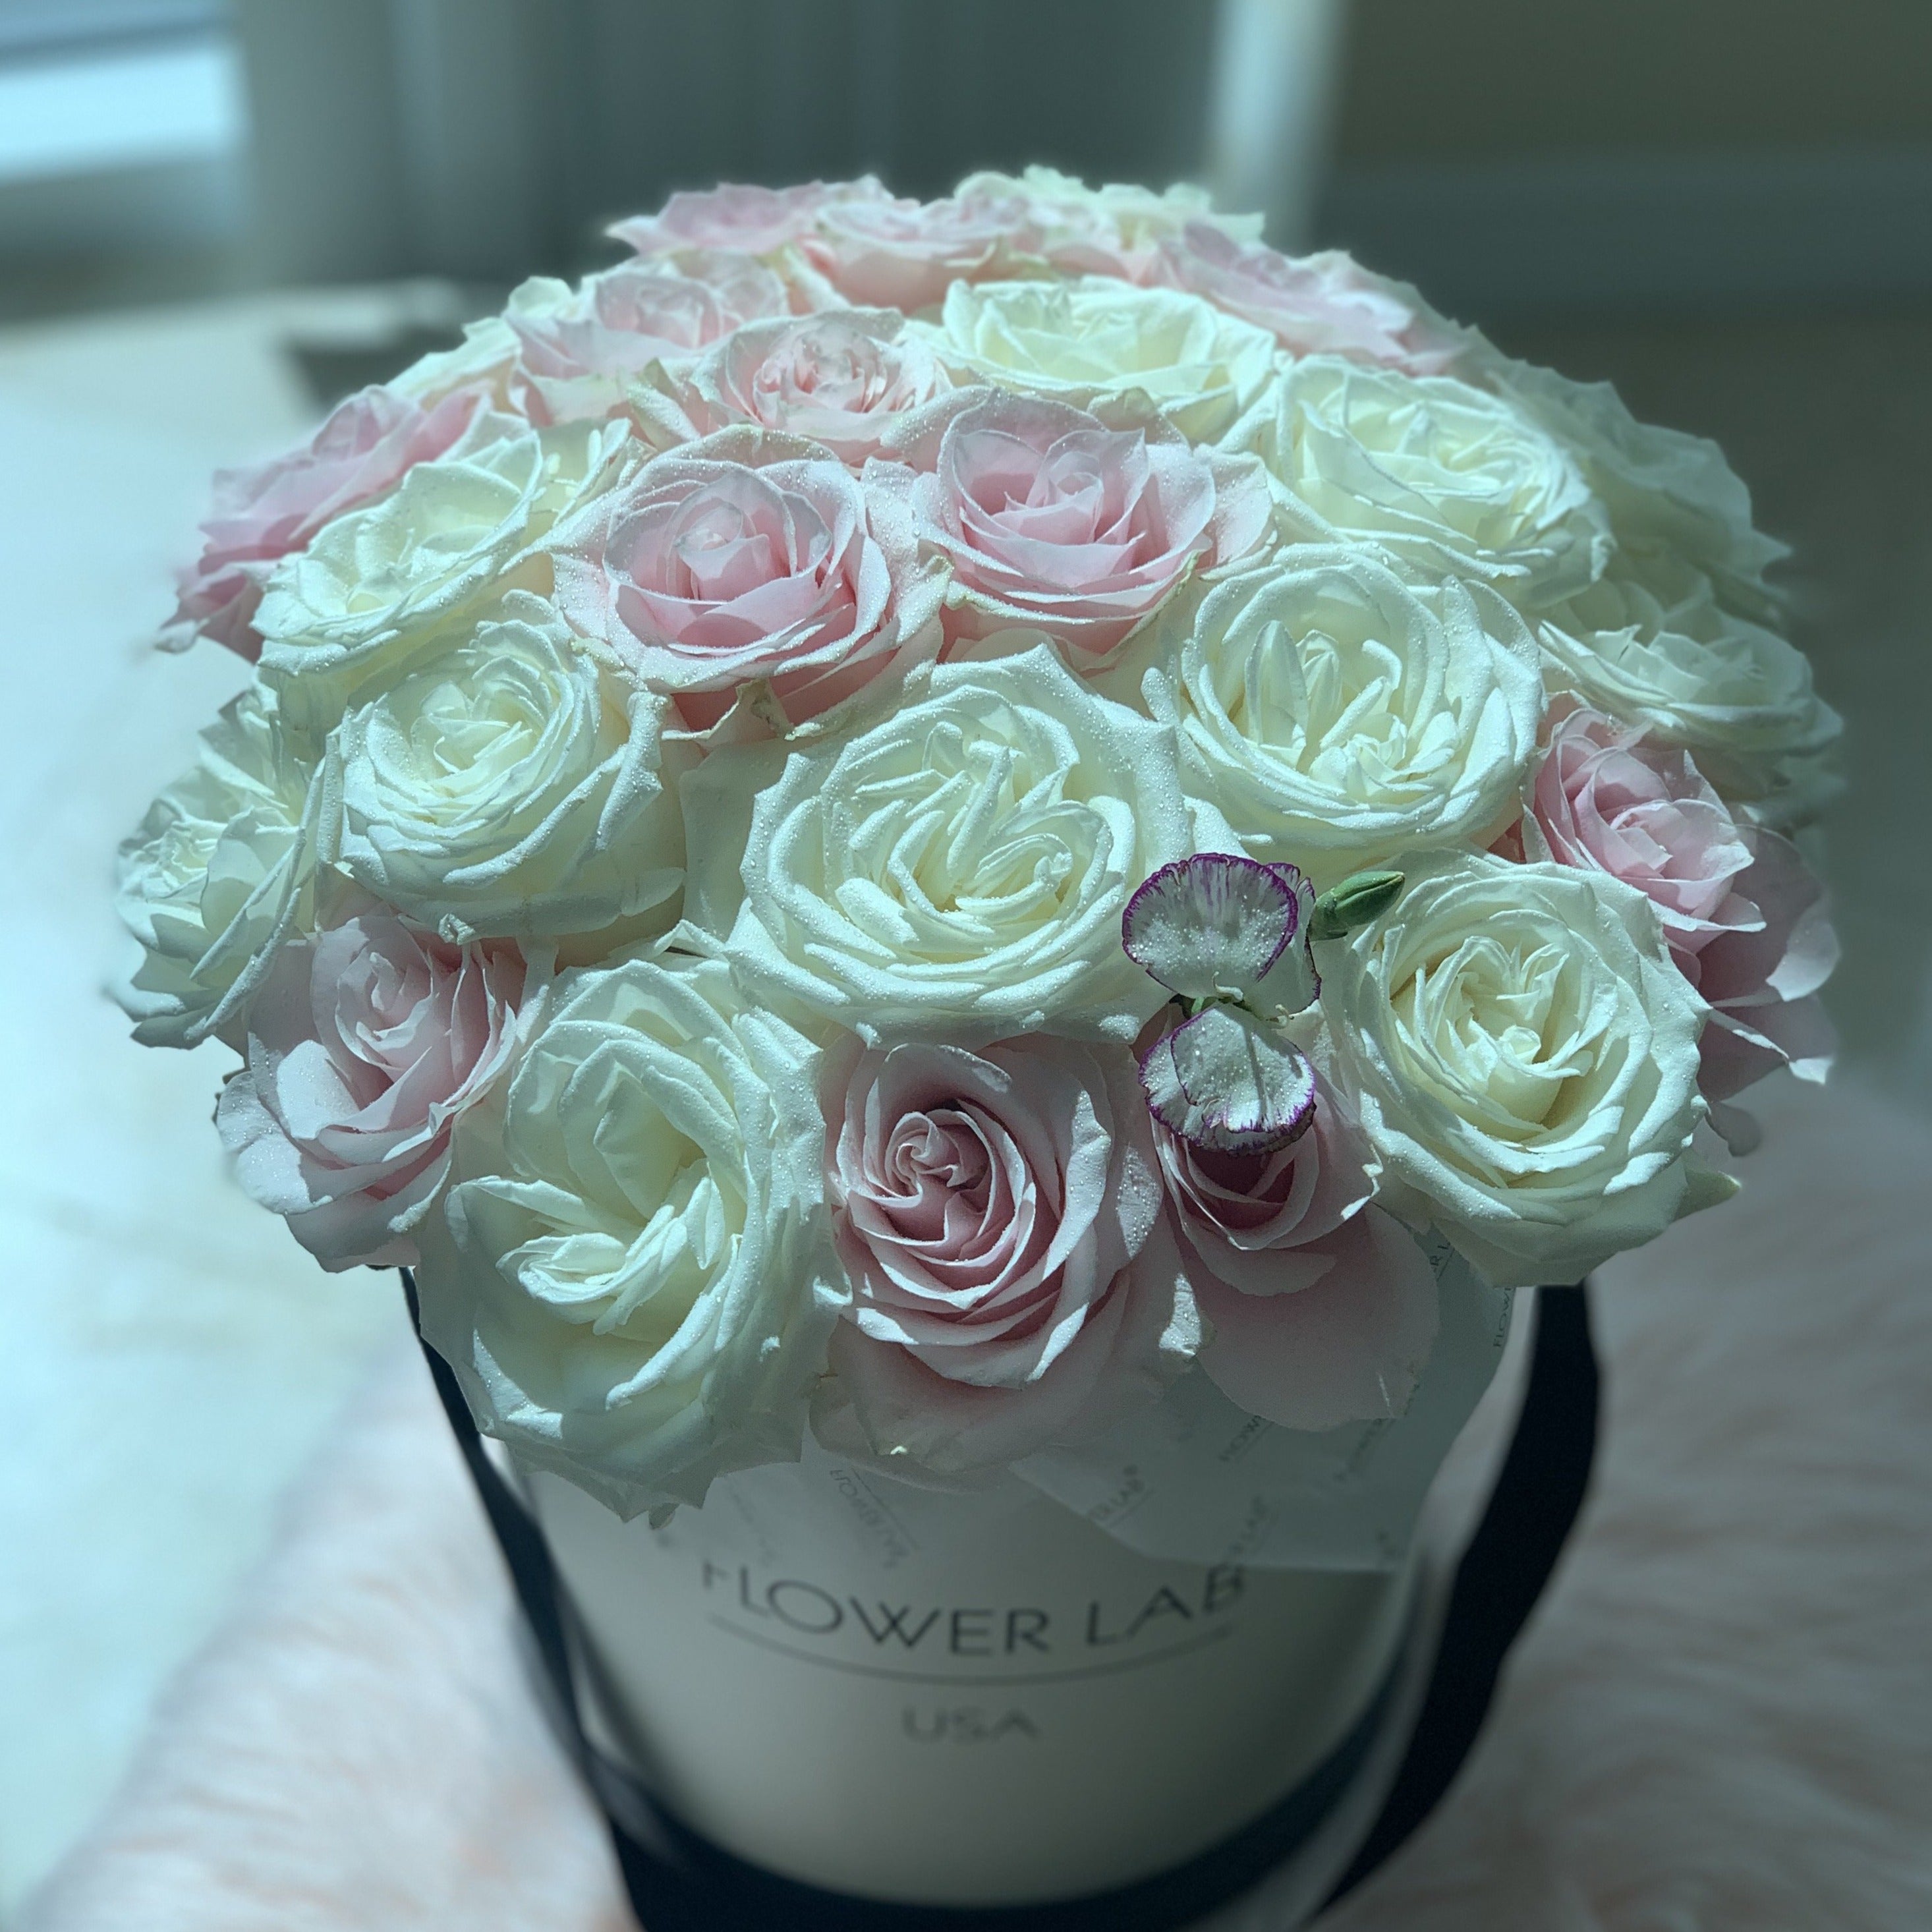 Mother's Day Anna hatbox with white and pink roses